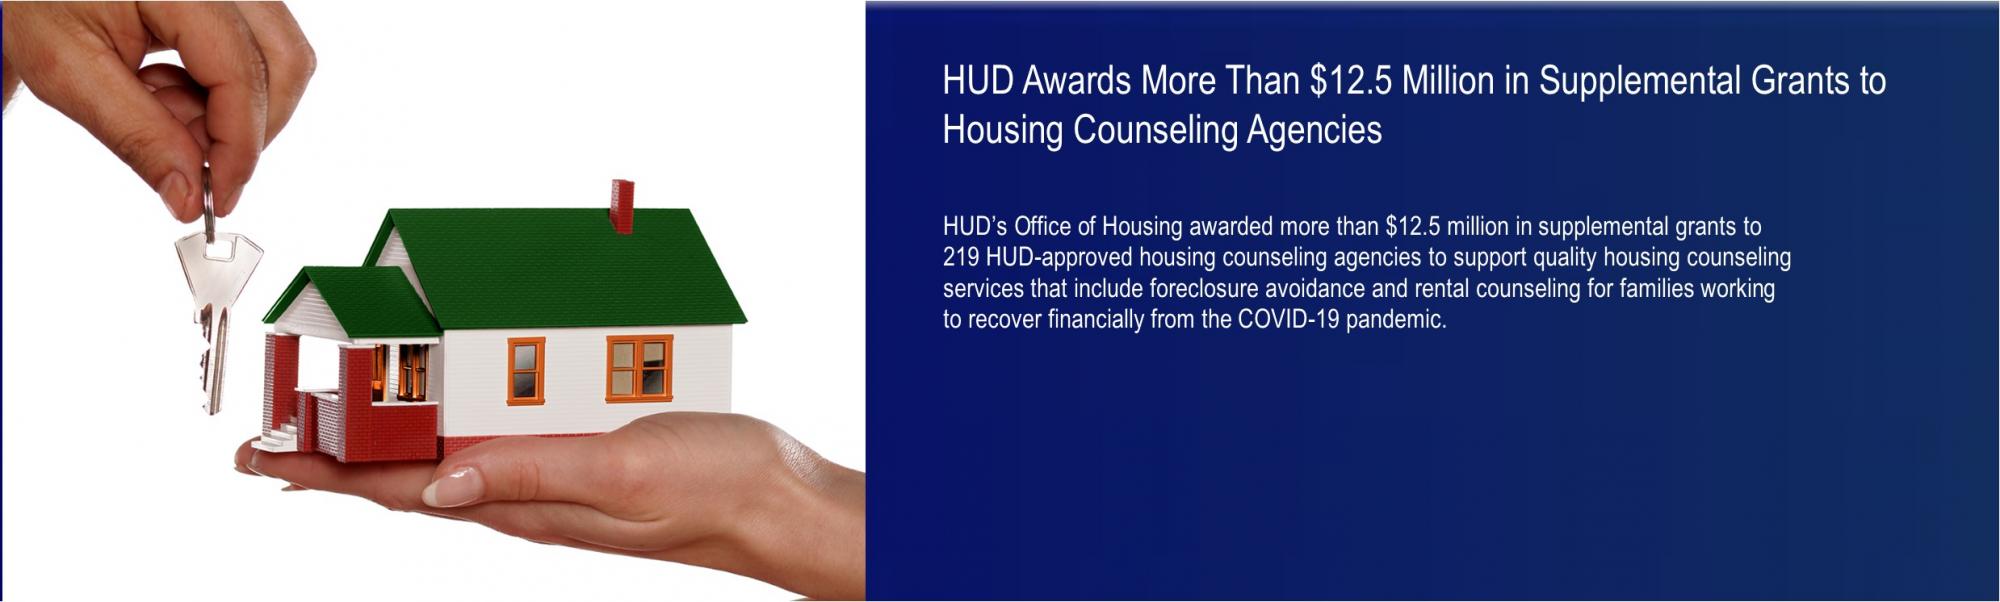 [HUD Awards More Than $12.5 Million in Supplemental Grants to Housing Counseling Agencies]. 